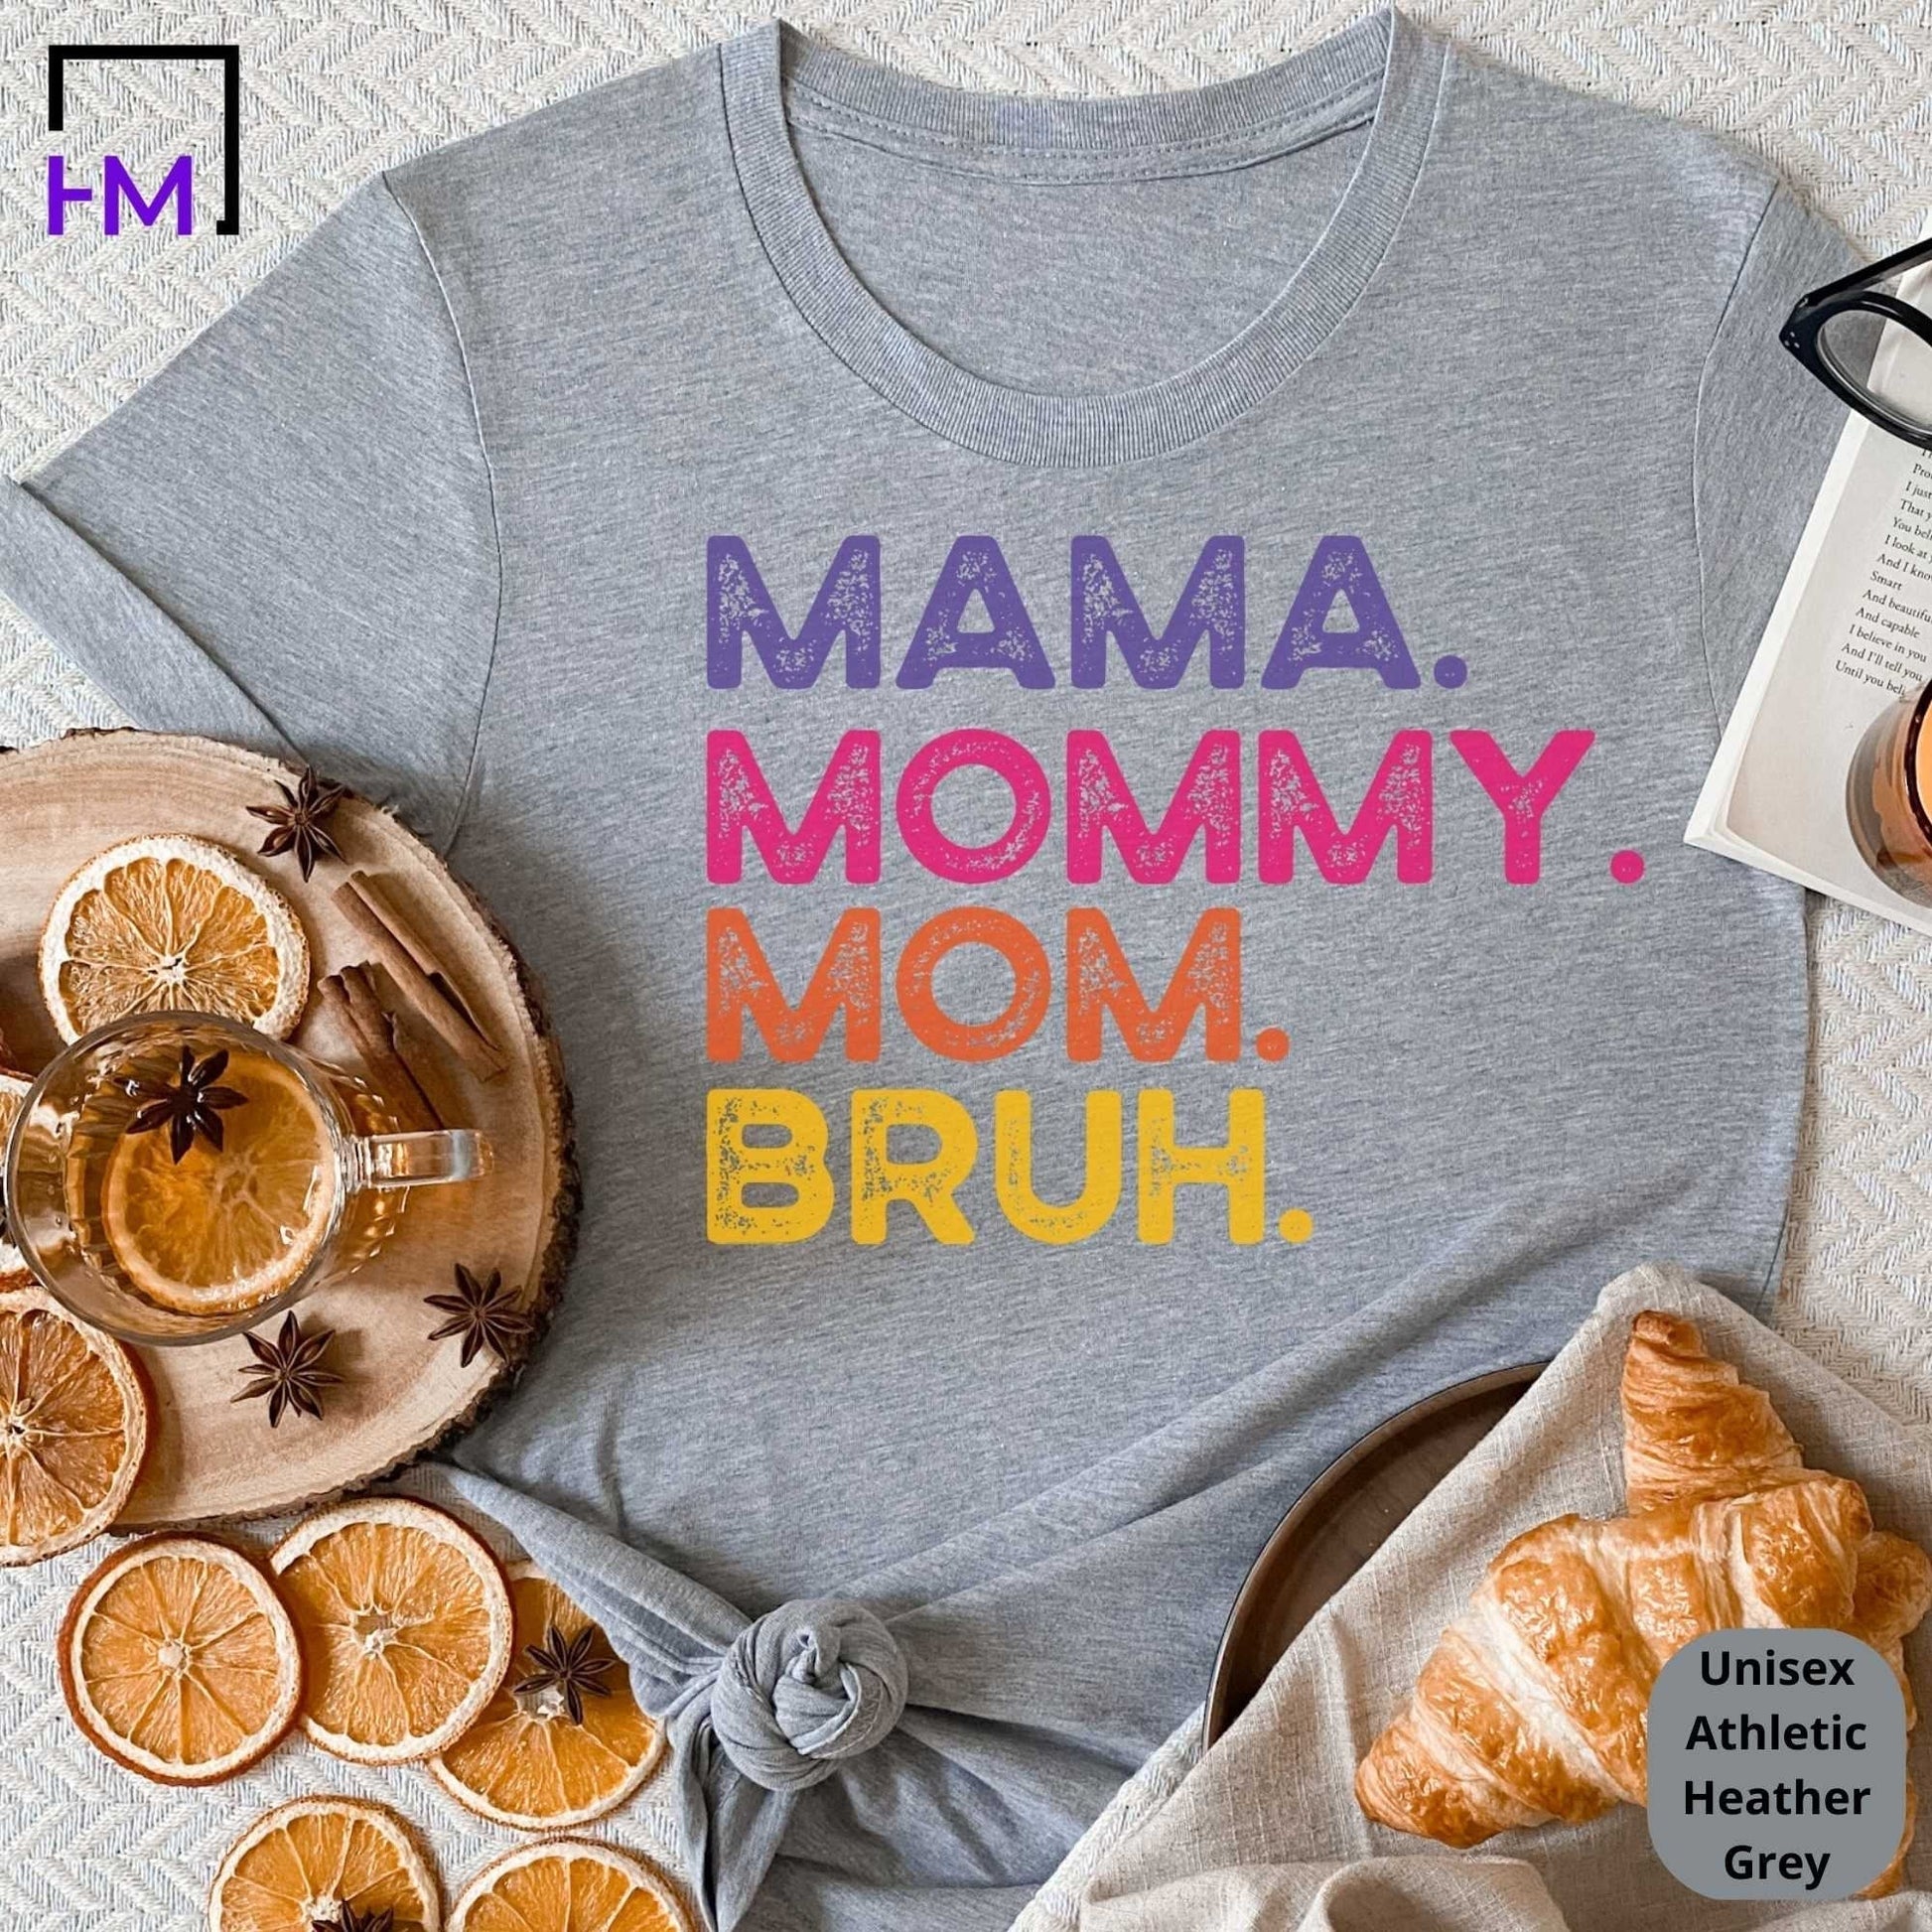 Mommy. Mama. Mom. Bruh. Mom Life Shirt, Perfect Mother's Day Gift for Busy Moms HMDesignStudioUS